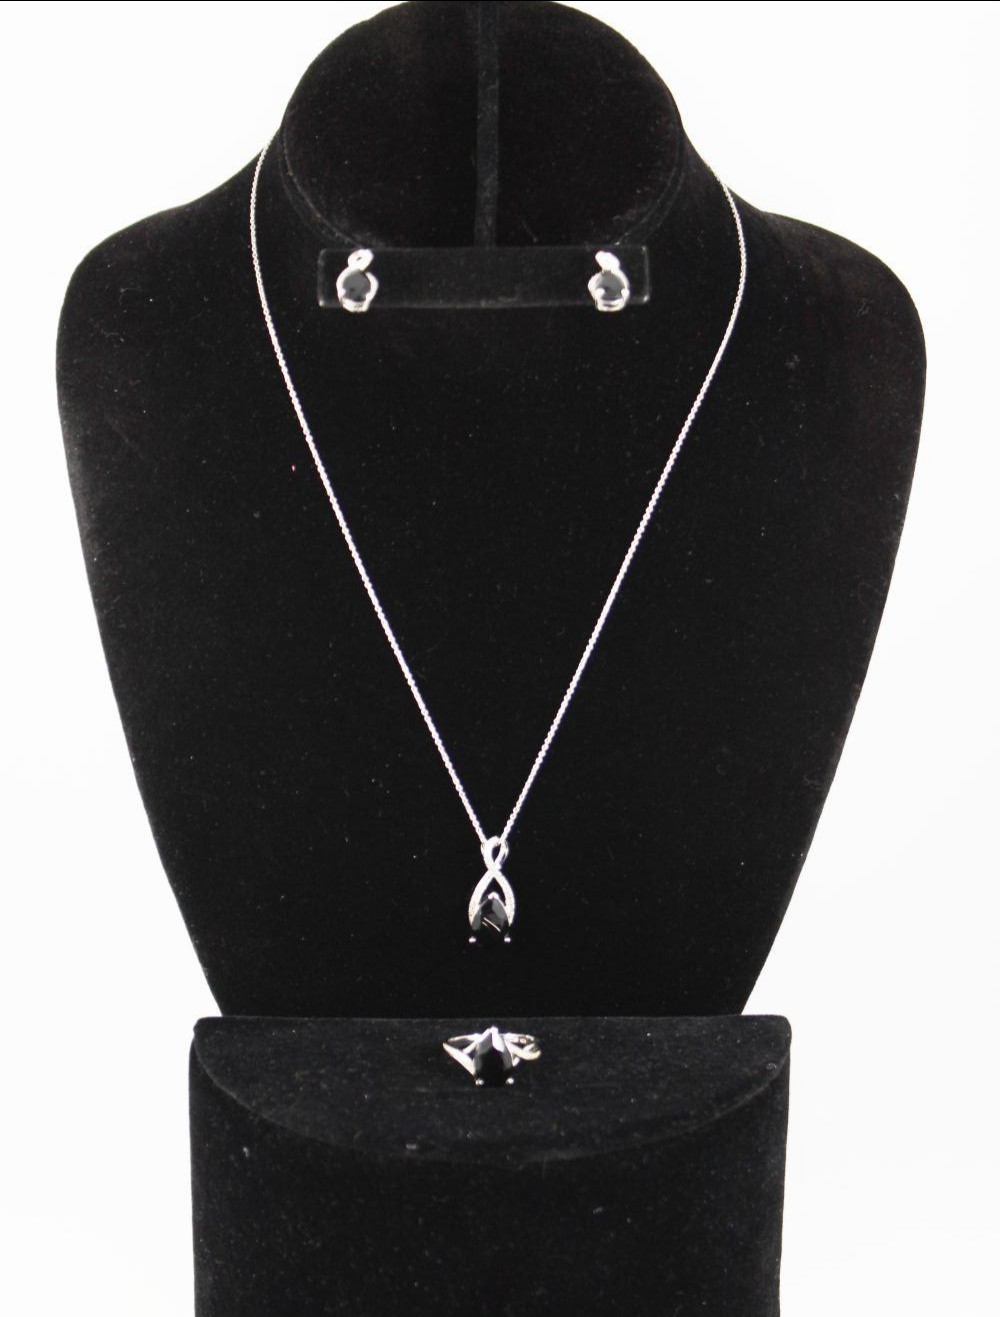 CONTEMPORARY SILVER, ONYX, AND